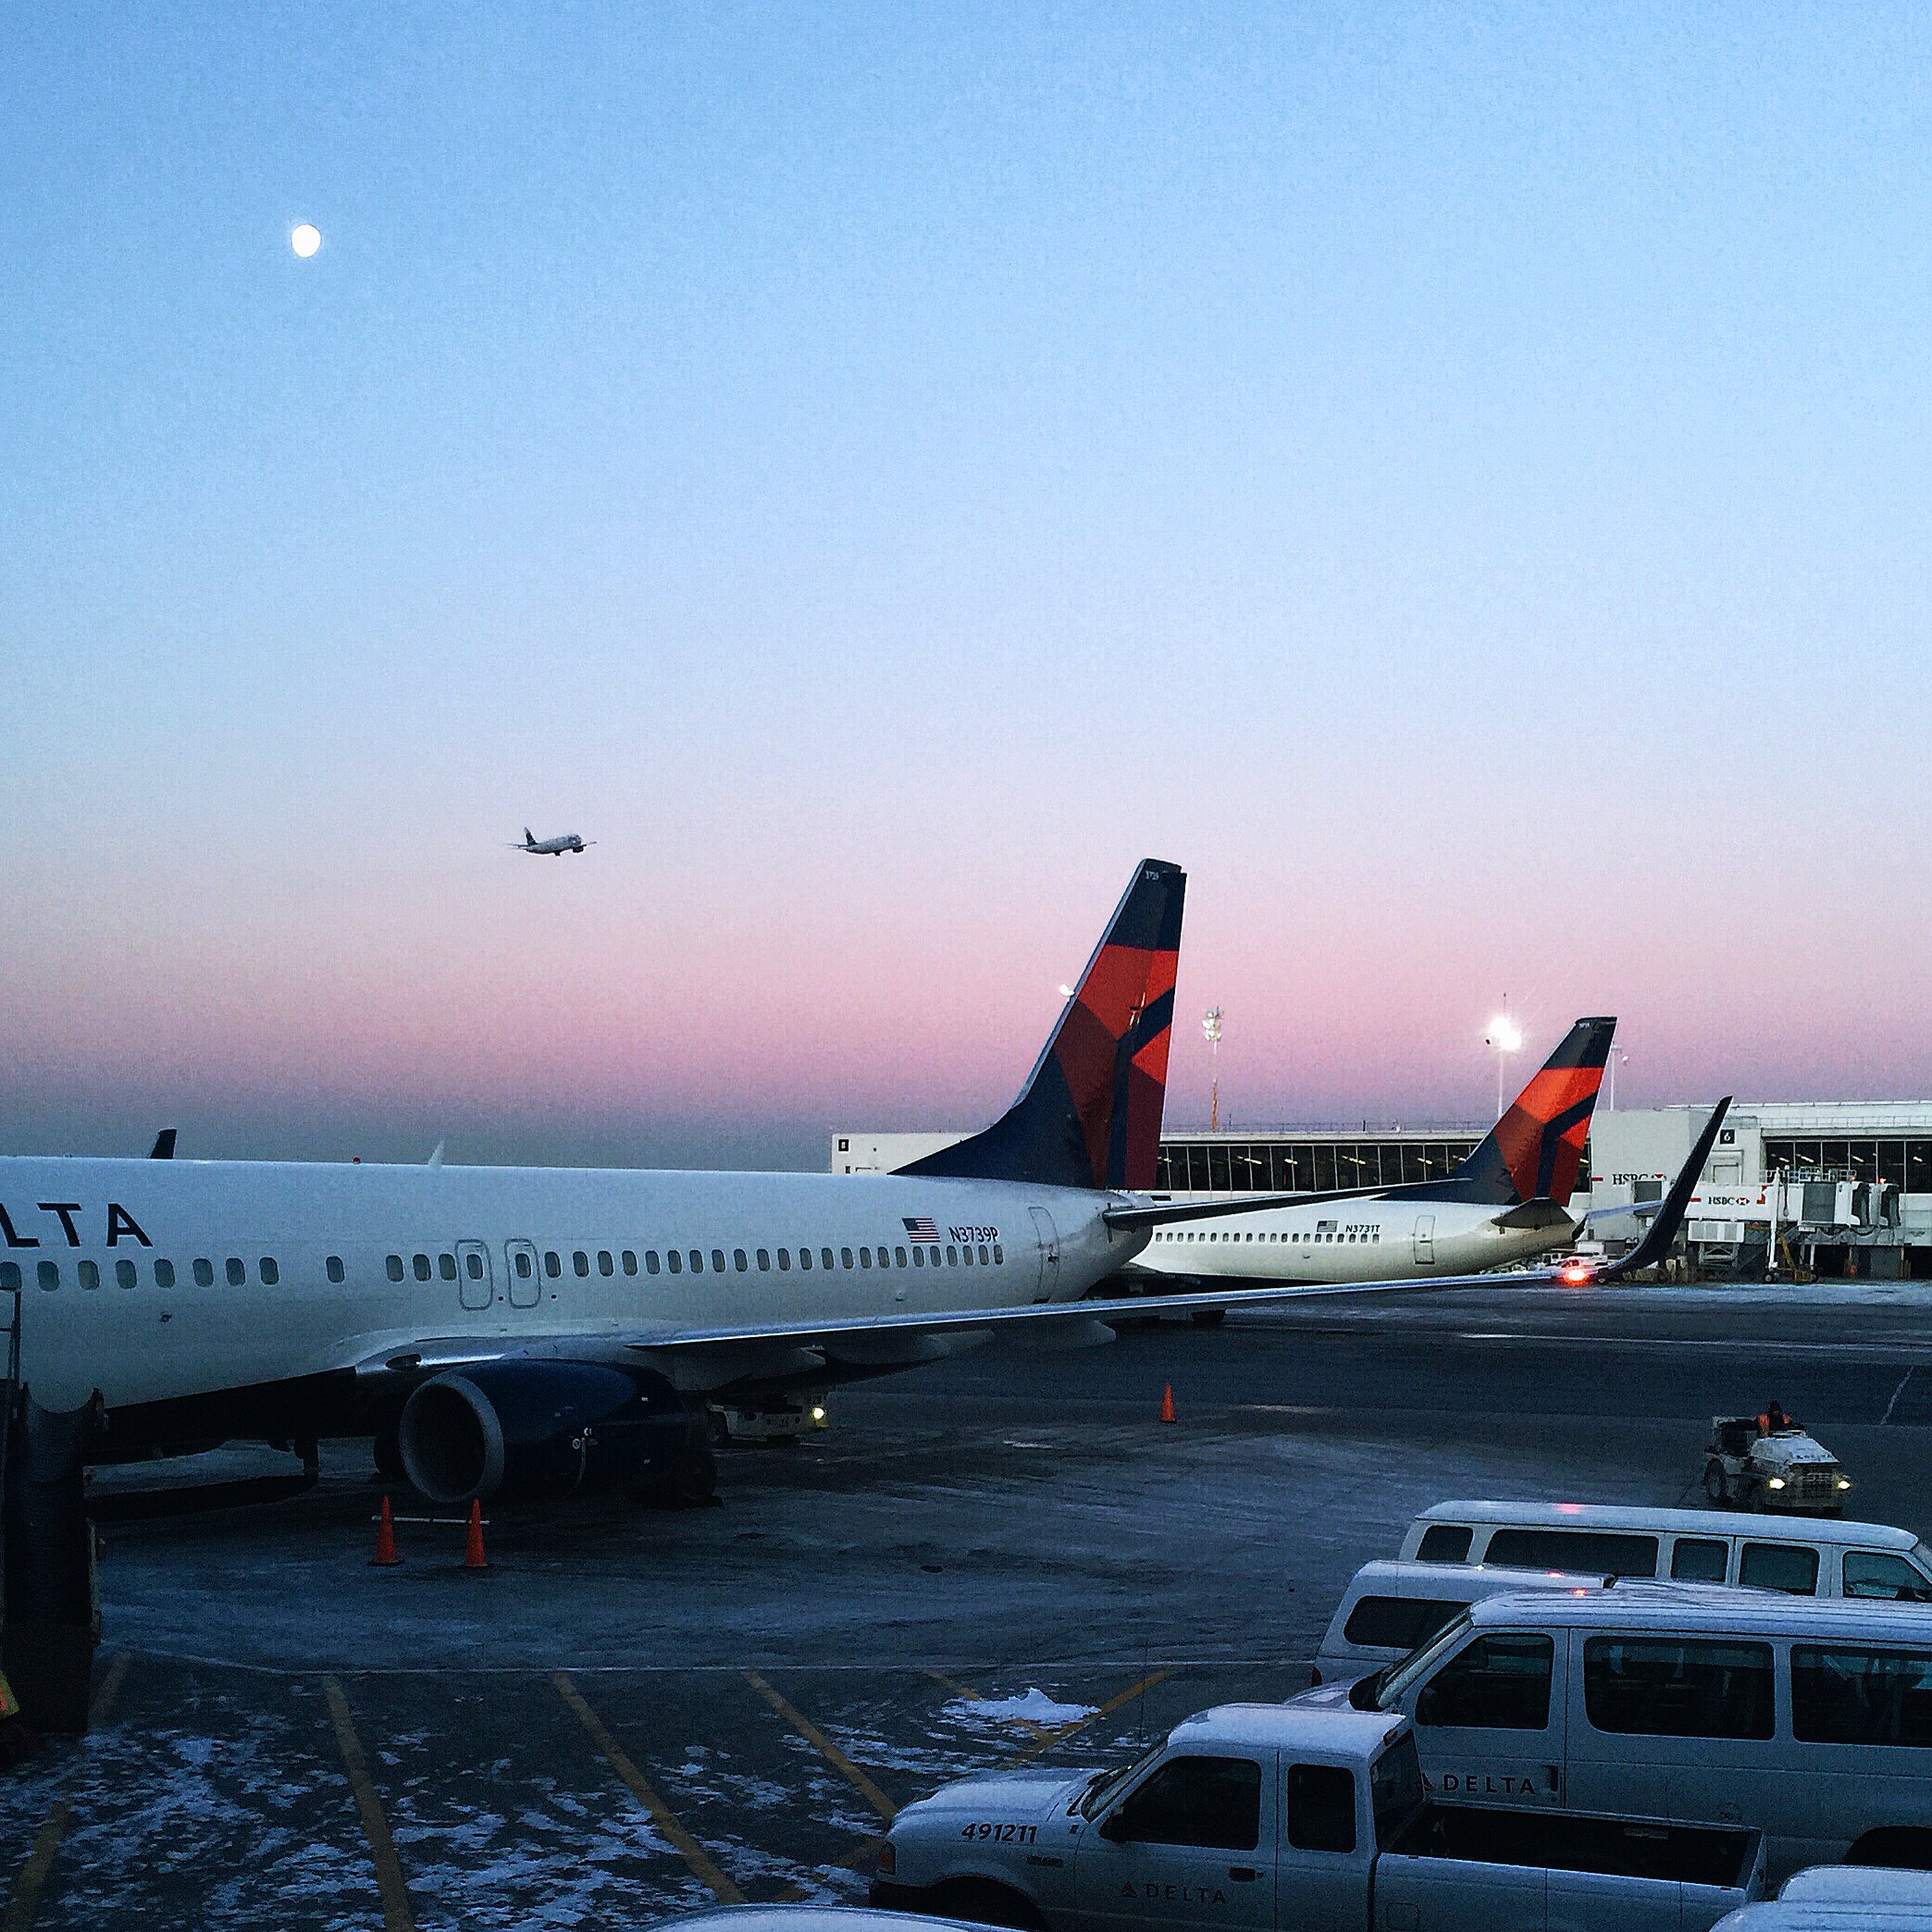   {the sunrise at JFK featuring the moon and a miniature airplane taking off.}  